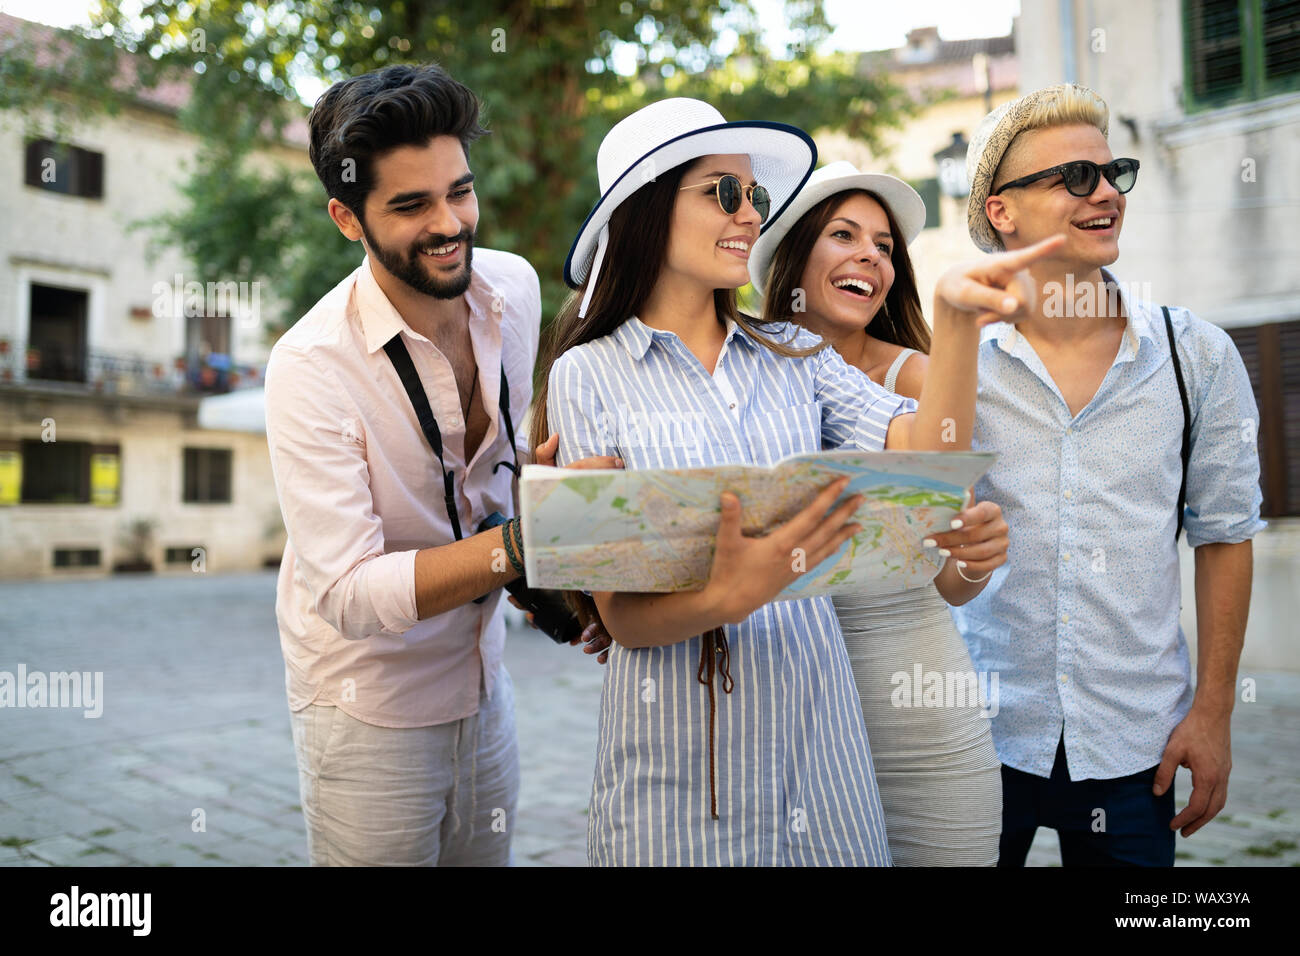 Group of friends spending quality time together in city Stock Photo